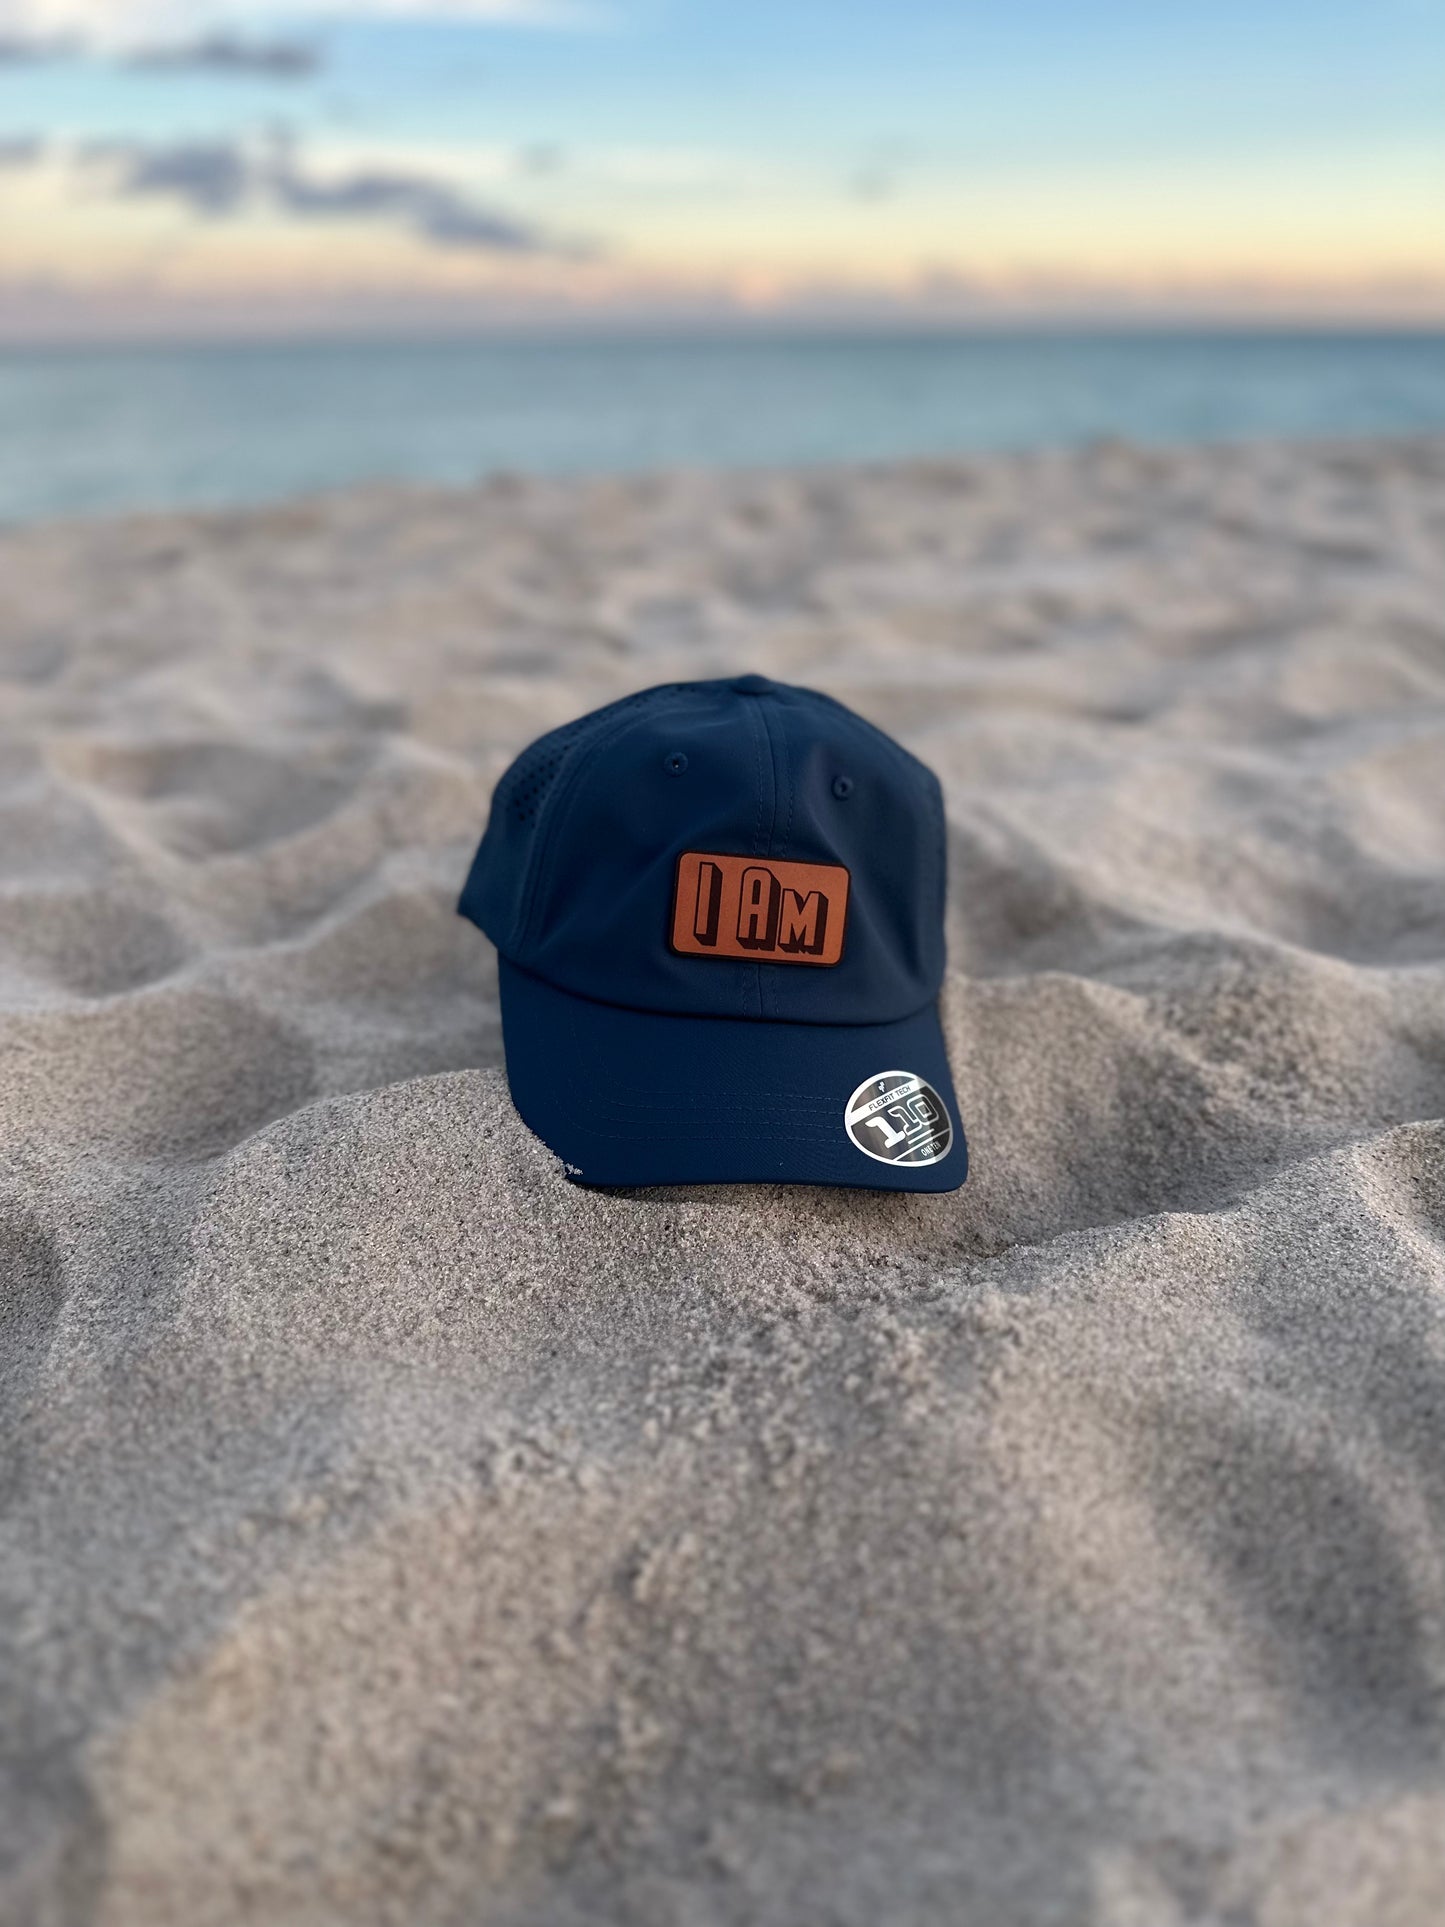 "I Am" Performance Dad Hat (Strap-back, navy-leather)